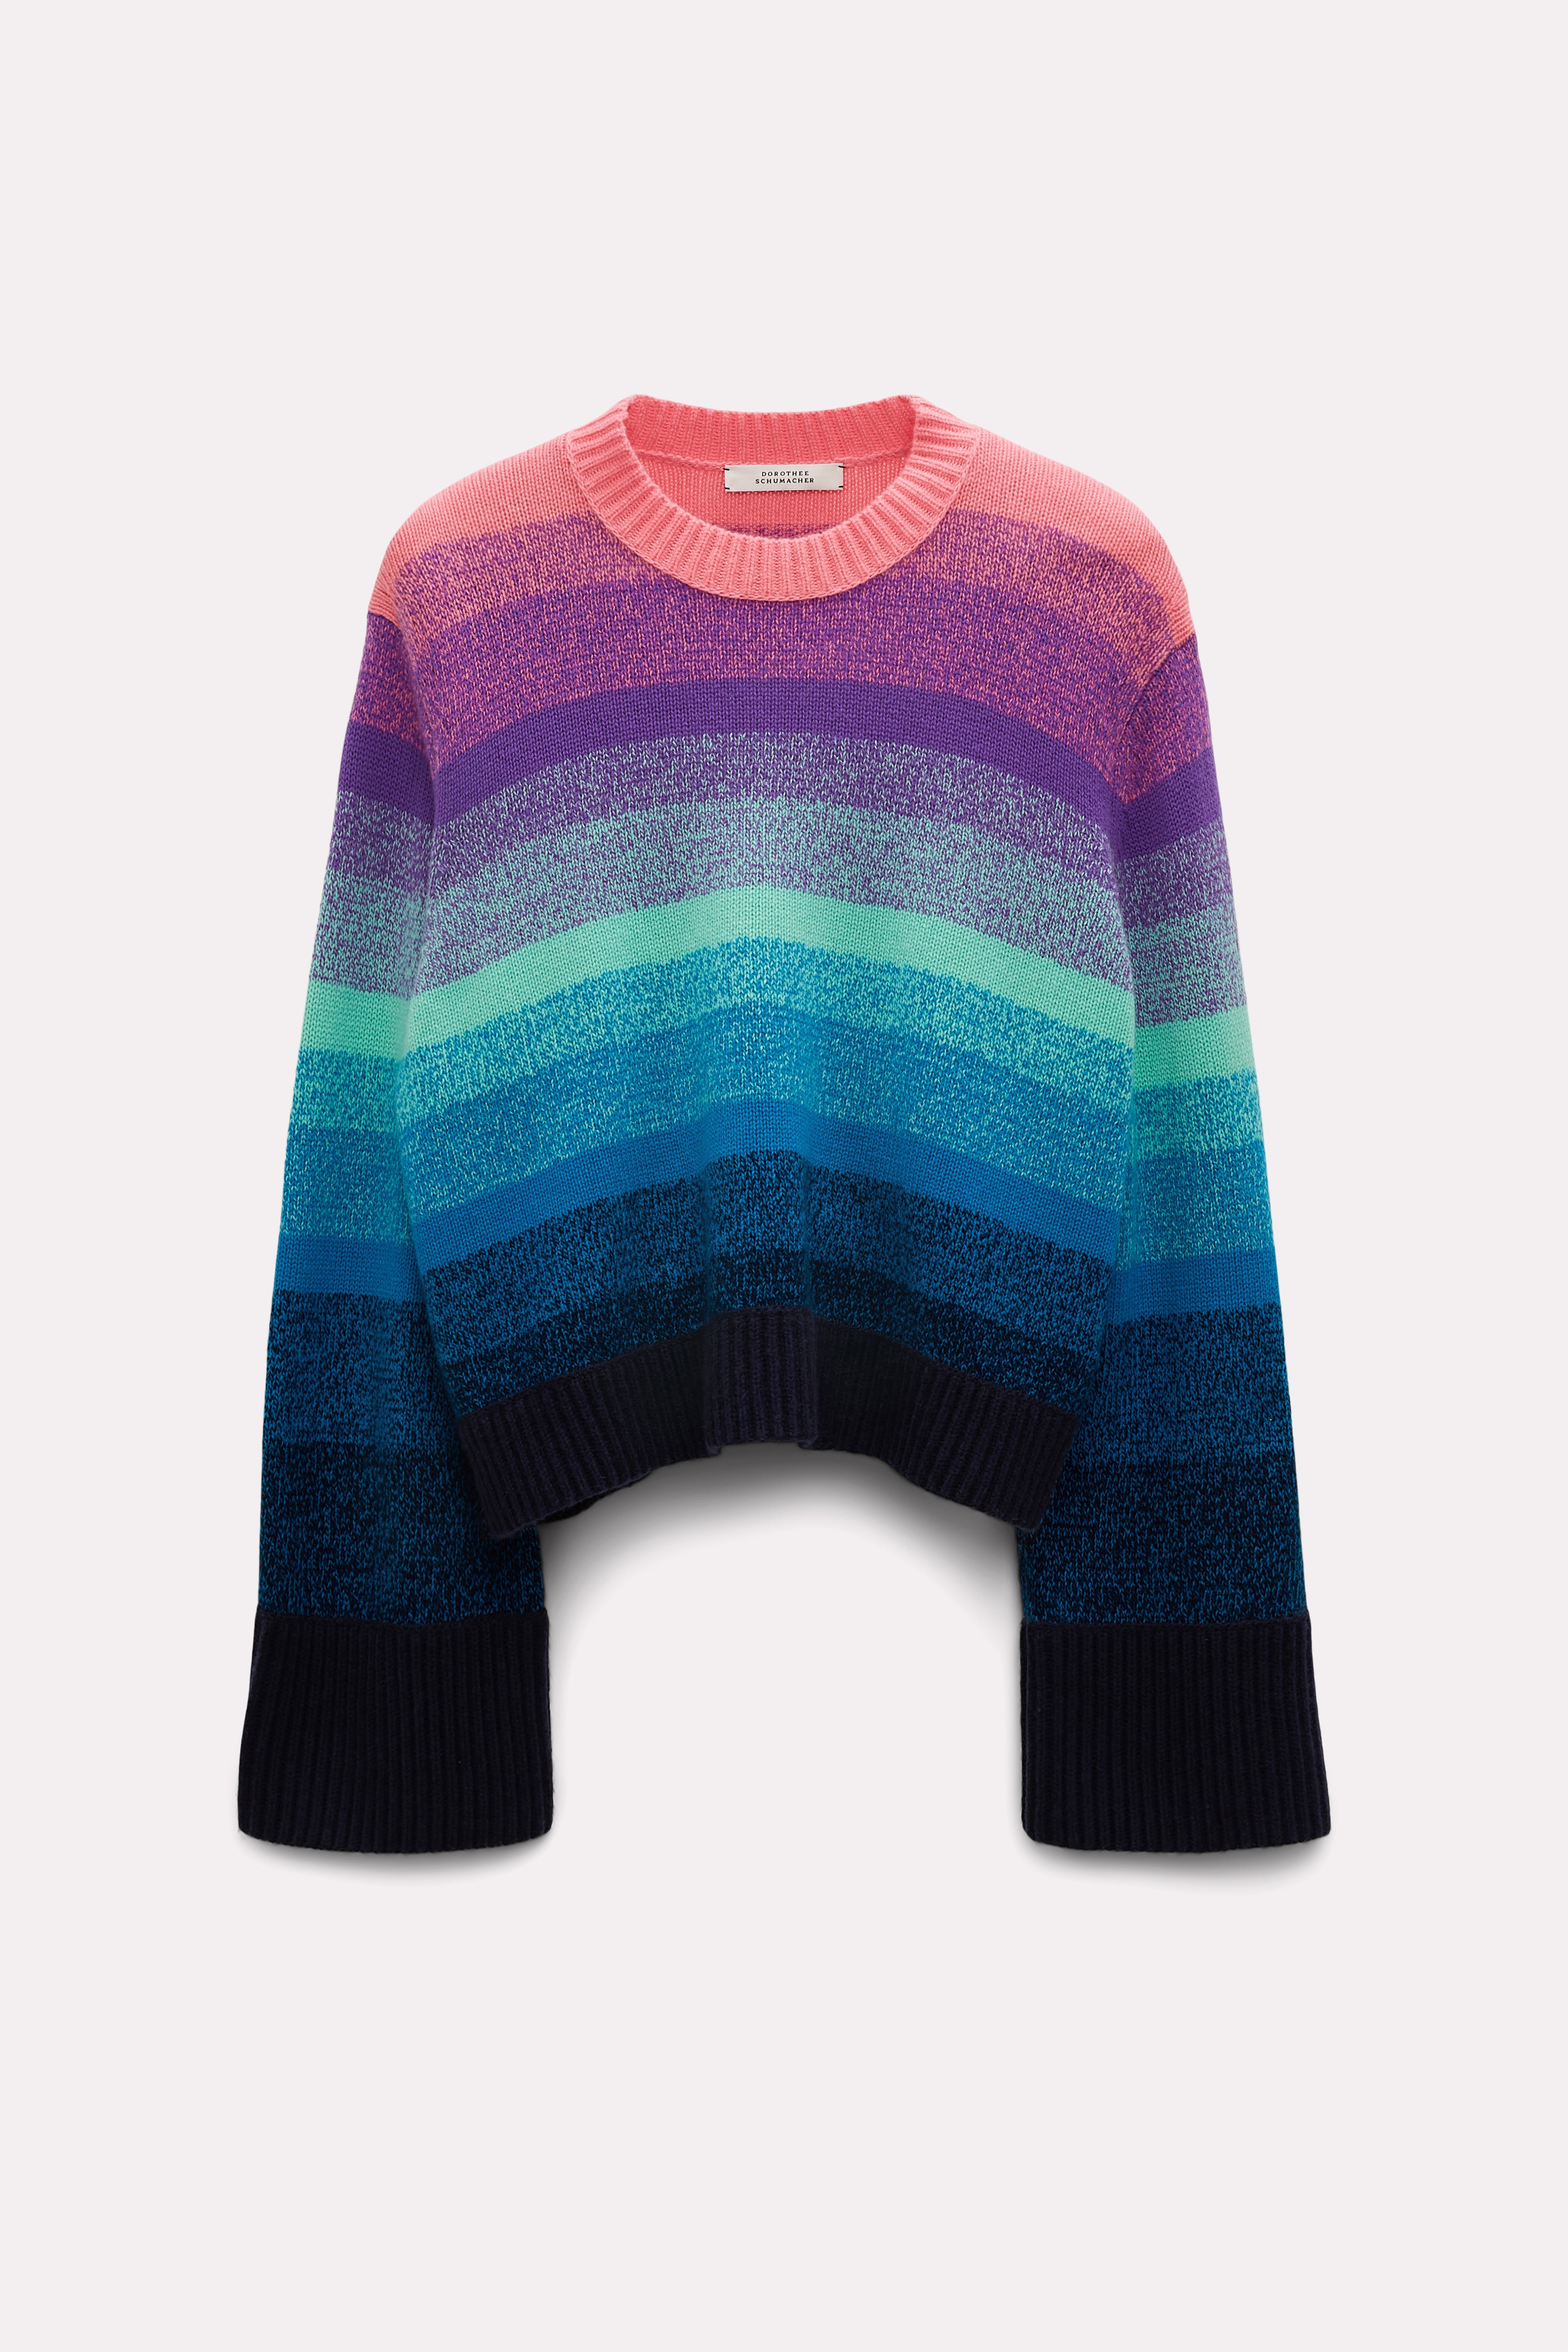 Dorothee-Schumacher-OUTLET-SALE-CHROMATIC-STATEMENTS-pullover-Strick-ARCHIVE-COLLECTION.jpg